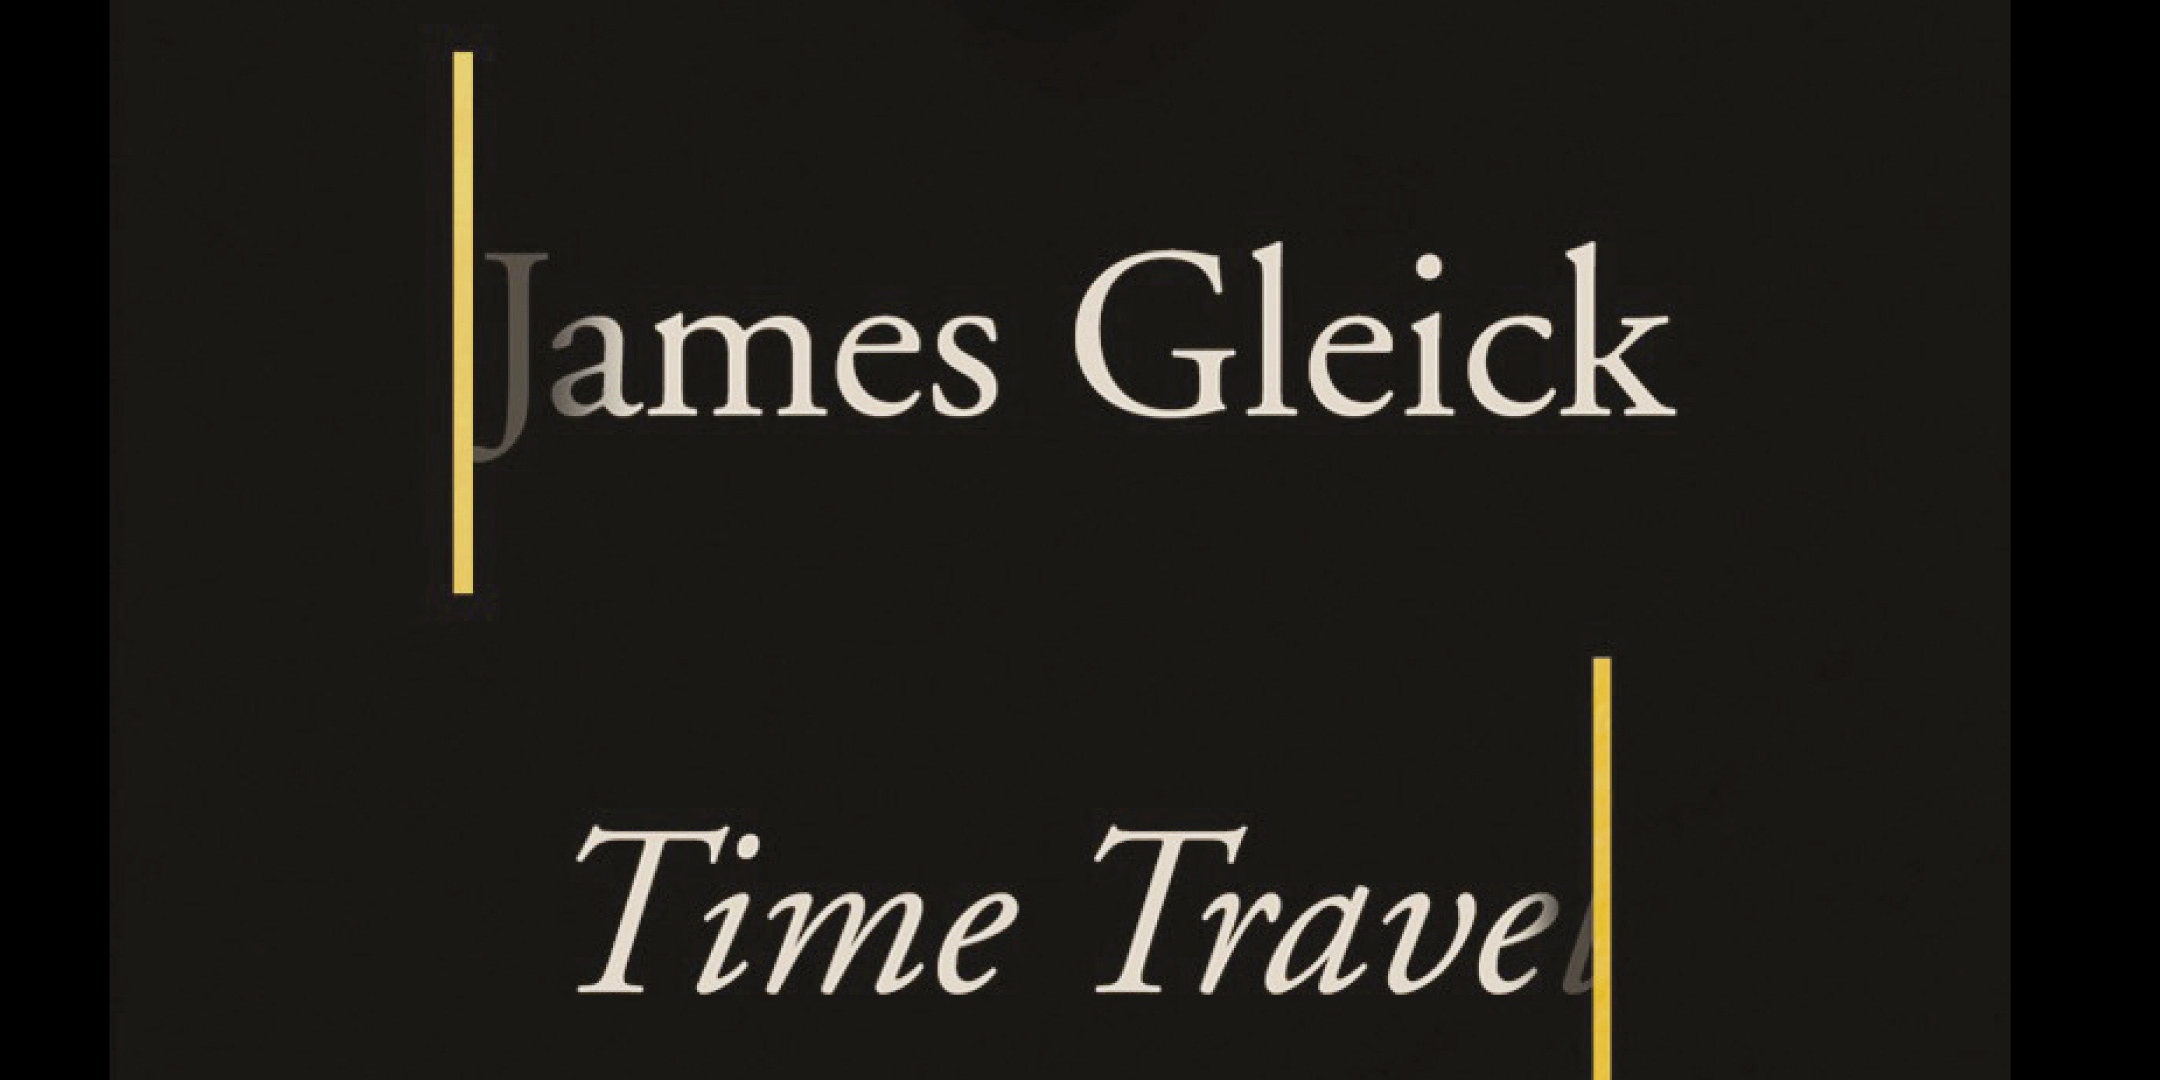 The Information by James Gleick